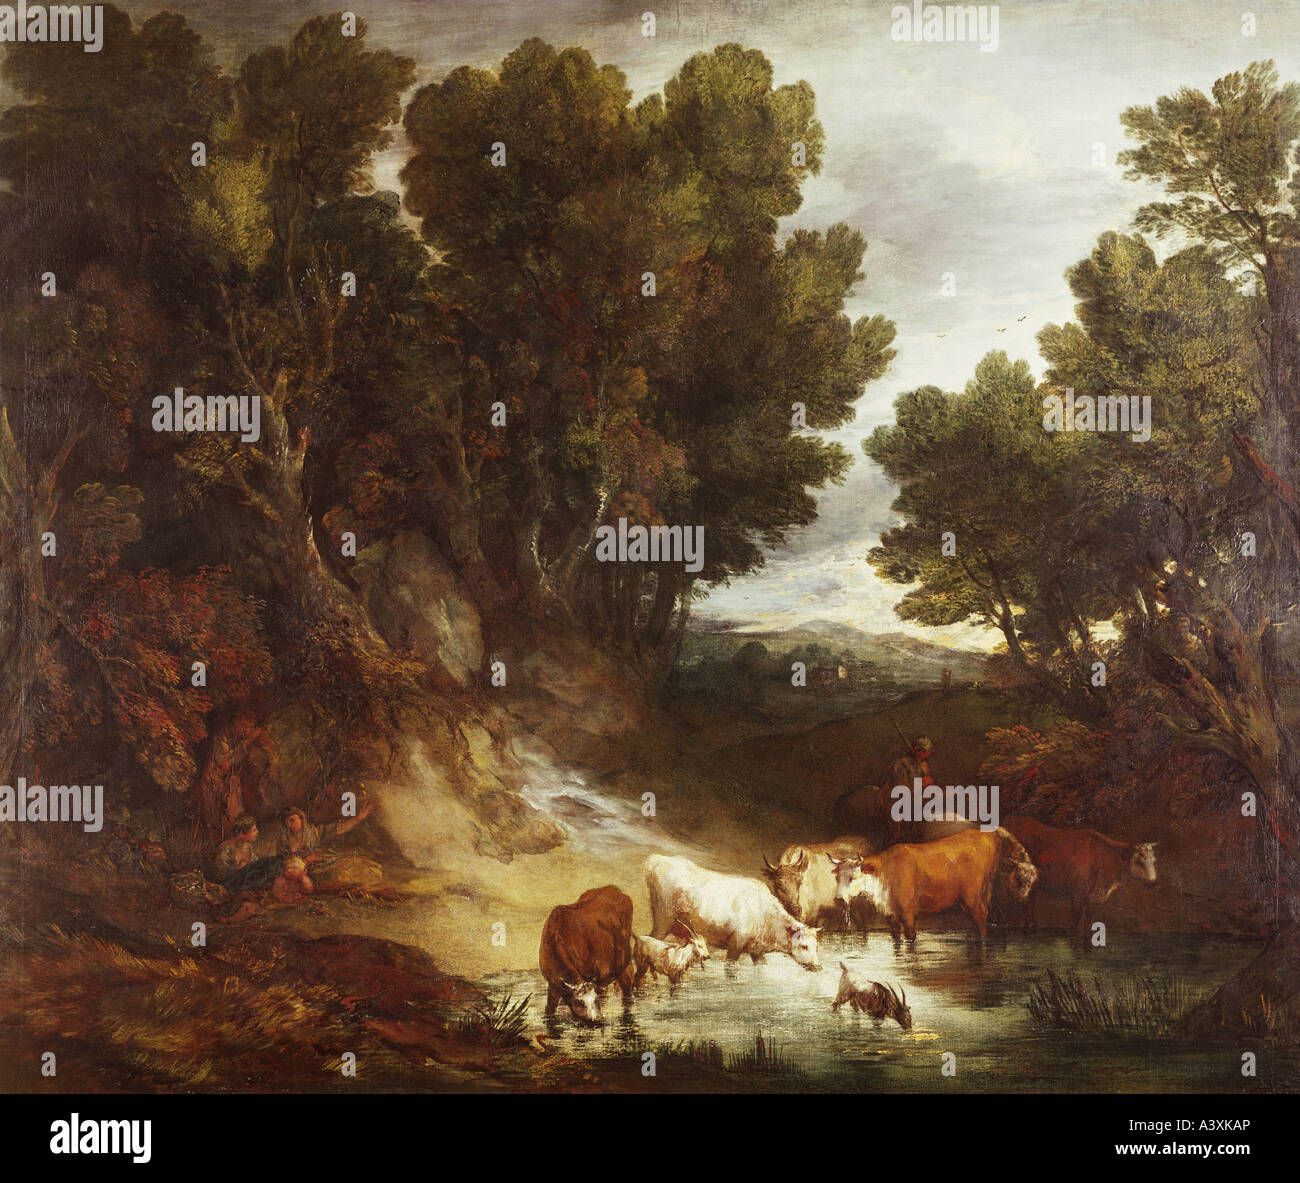 "fine arts, Gainsborough, Thomas, (1727 - 1788), painting, "The Watering Place", before 1777, oil on canvas, 147,3 cm x 180,3 Stock Photo